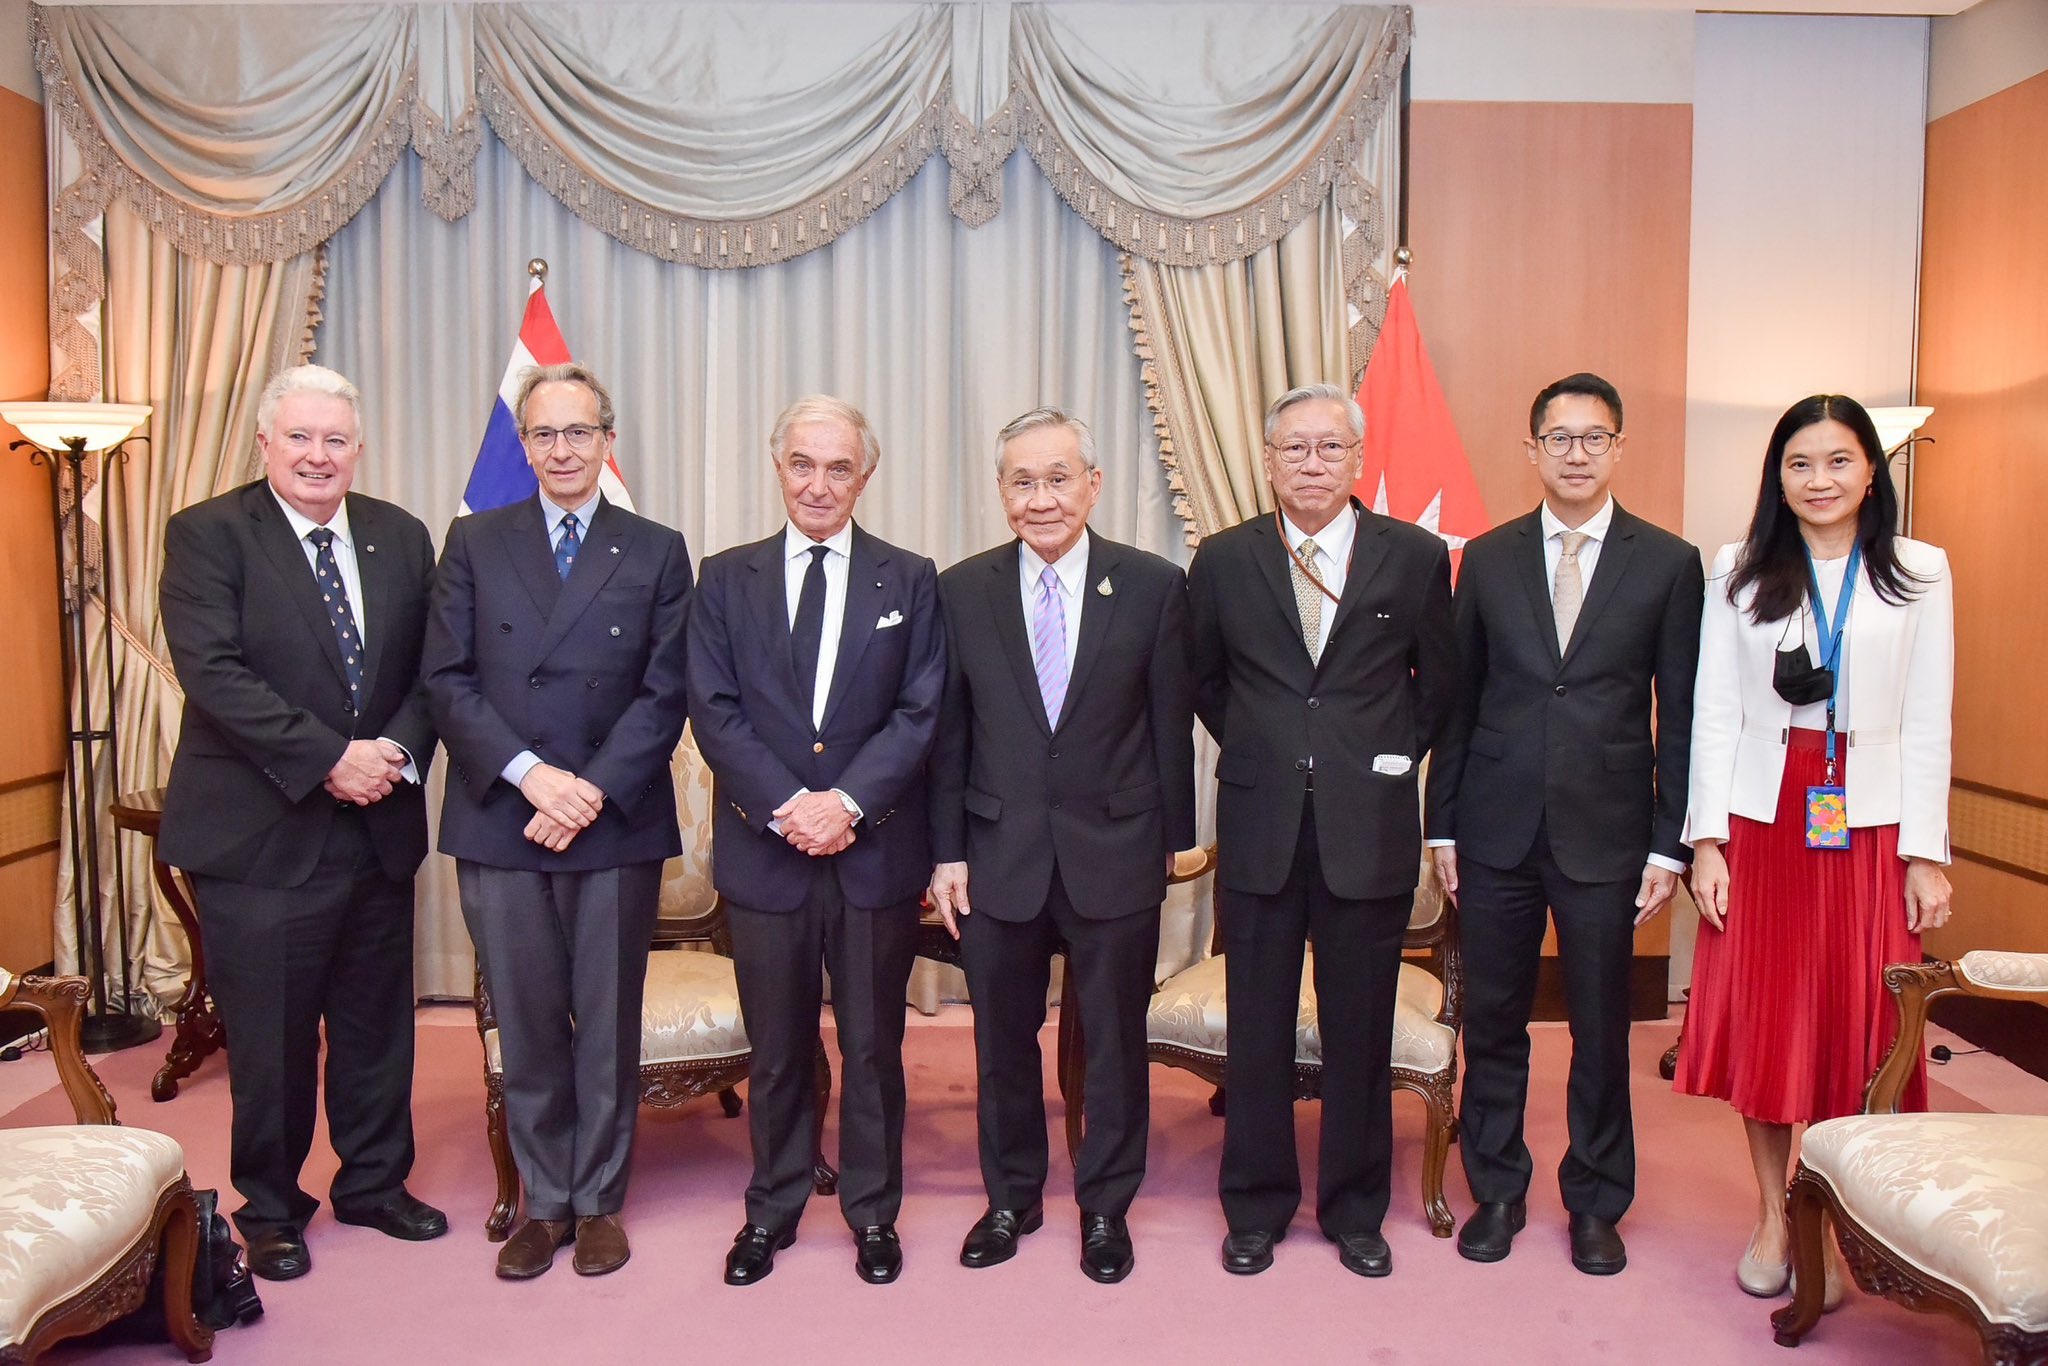 Deputy Prime Minister of Thailand received the Grand Chancellor of the Order of Malta